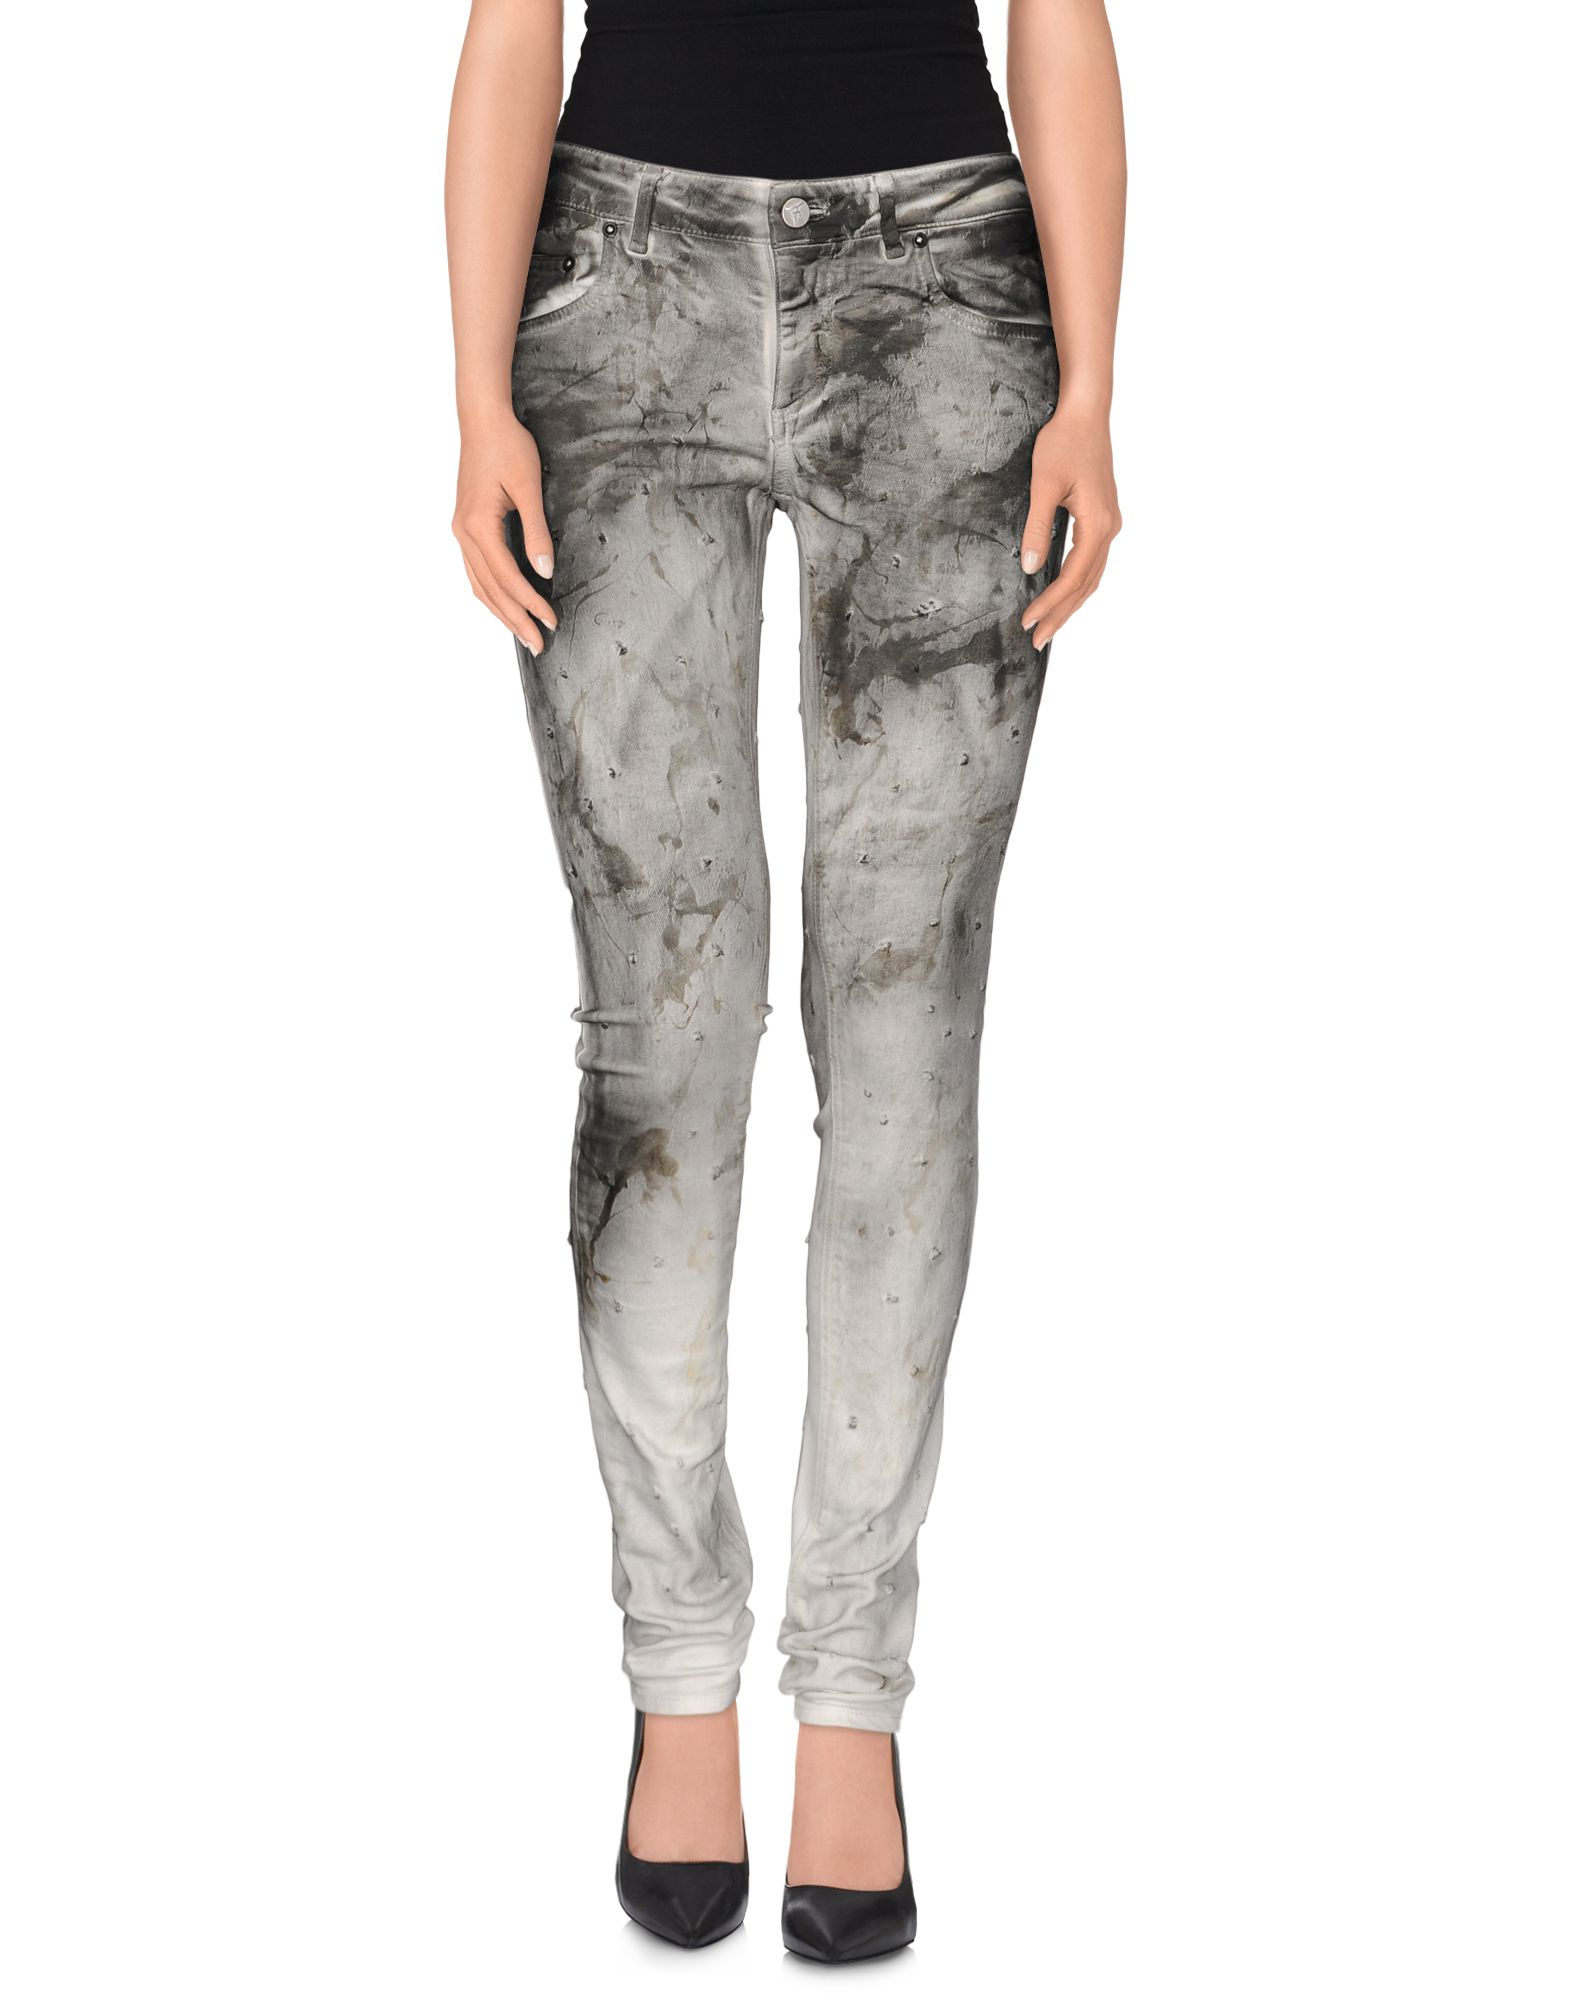 Lyst - Fagassent Denim Trousers in Gray